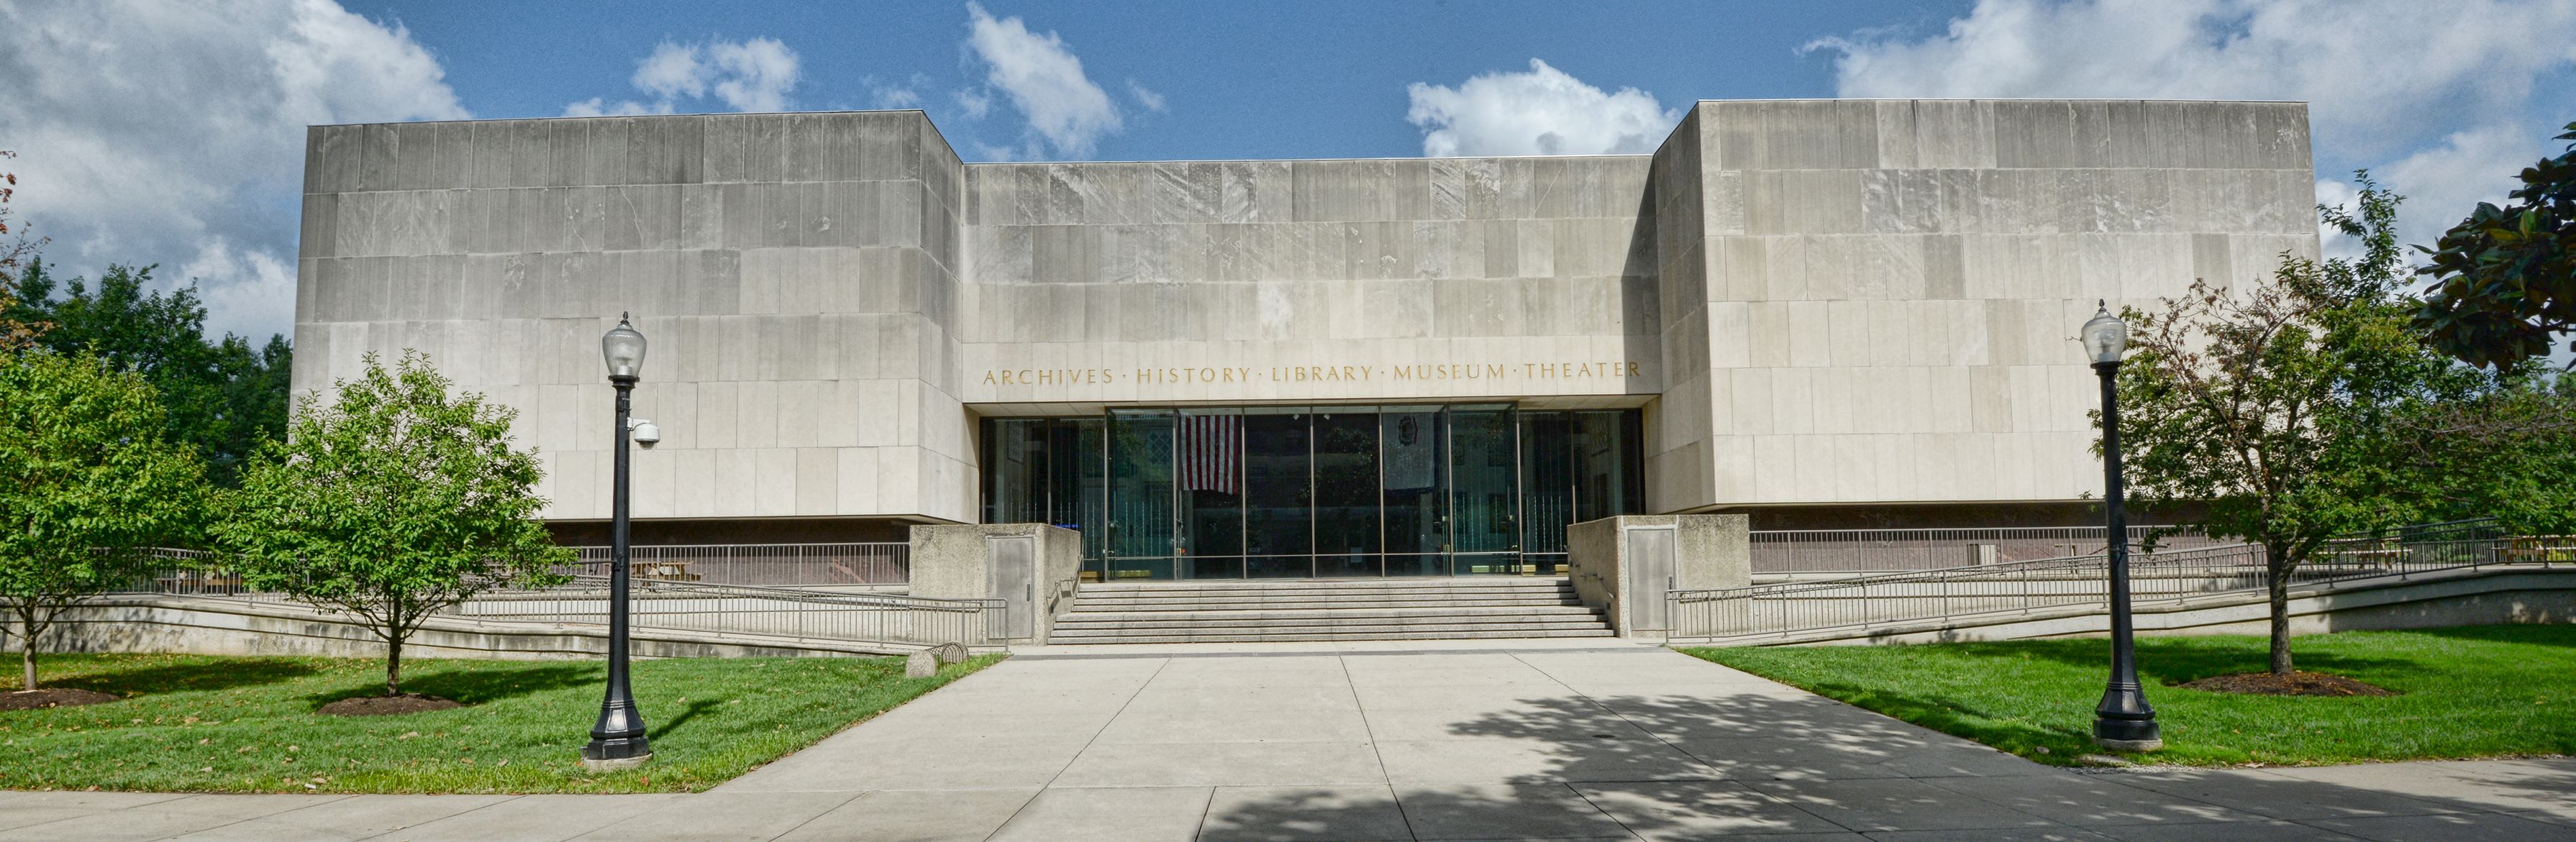 exterior of the Culture Center